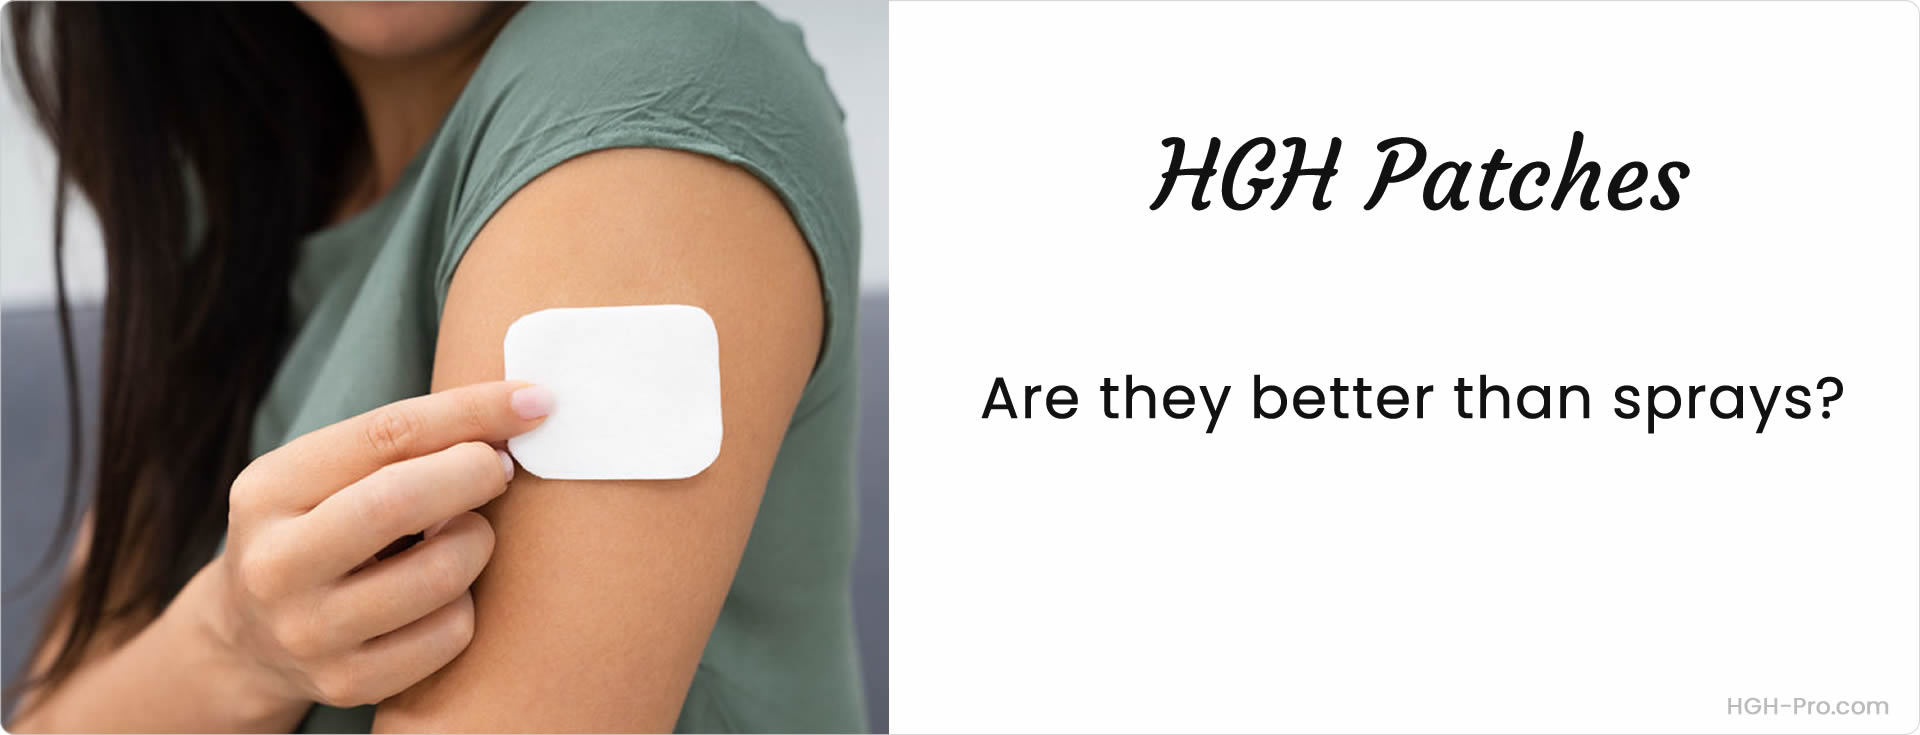 HGH patches